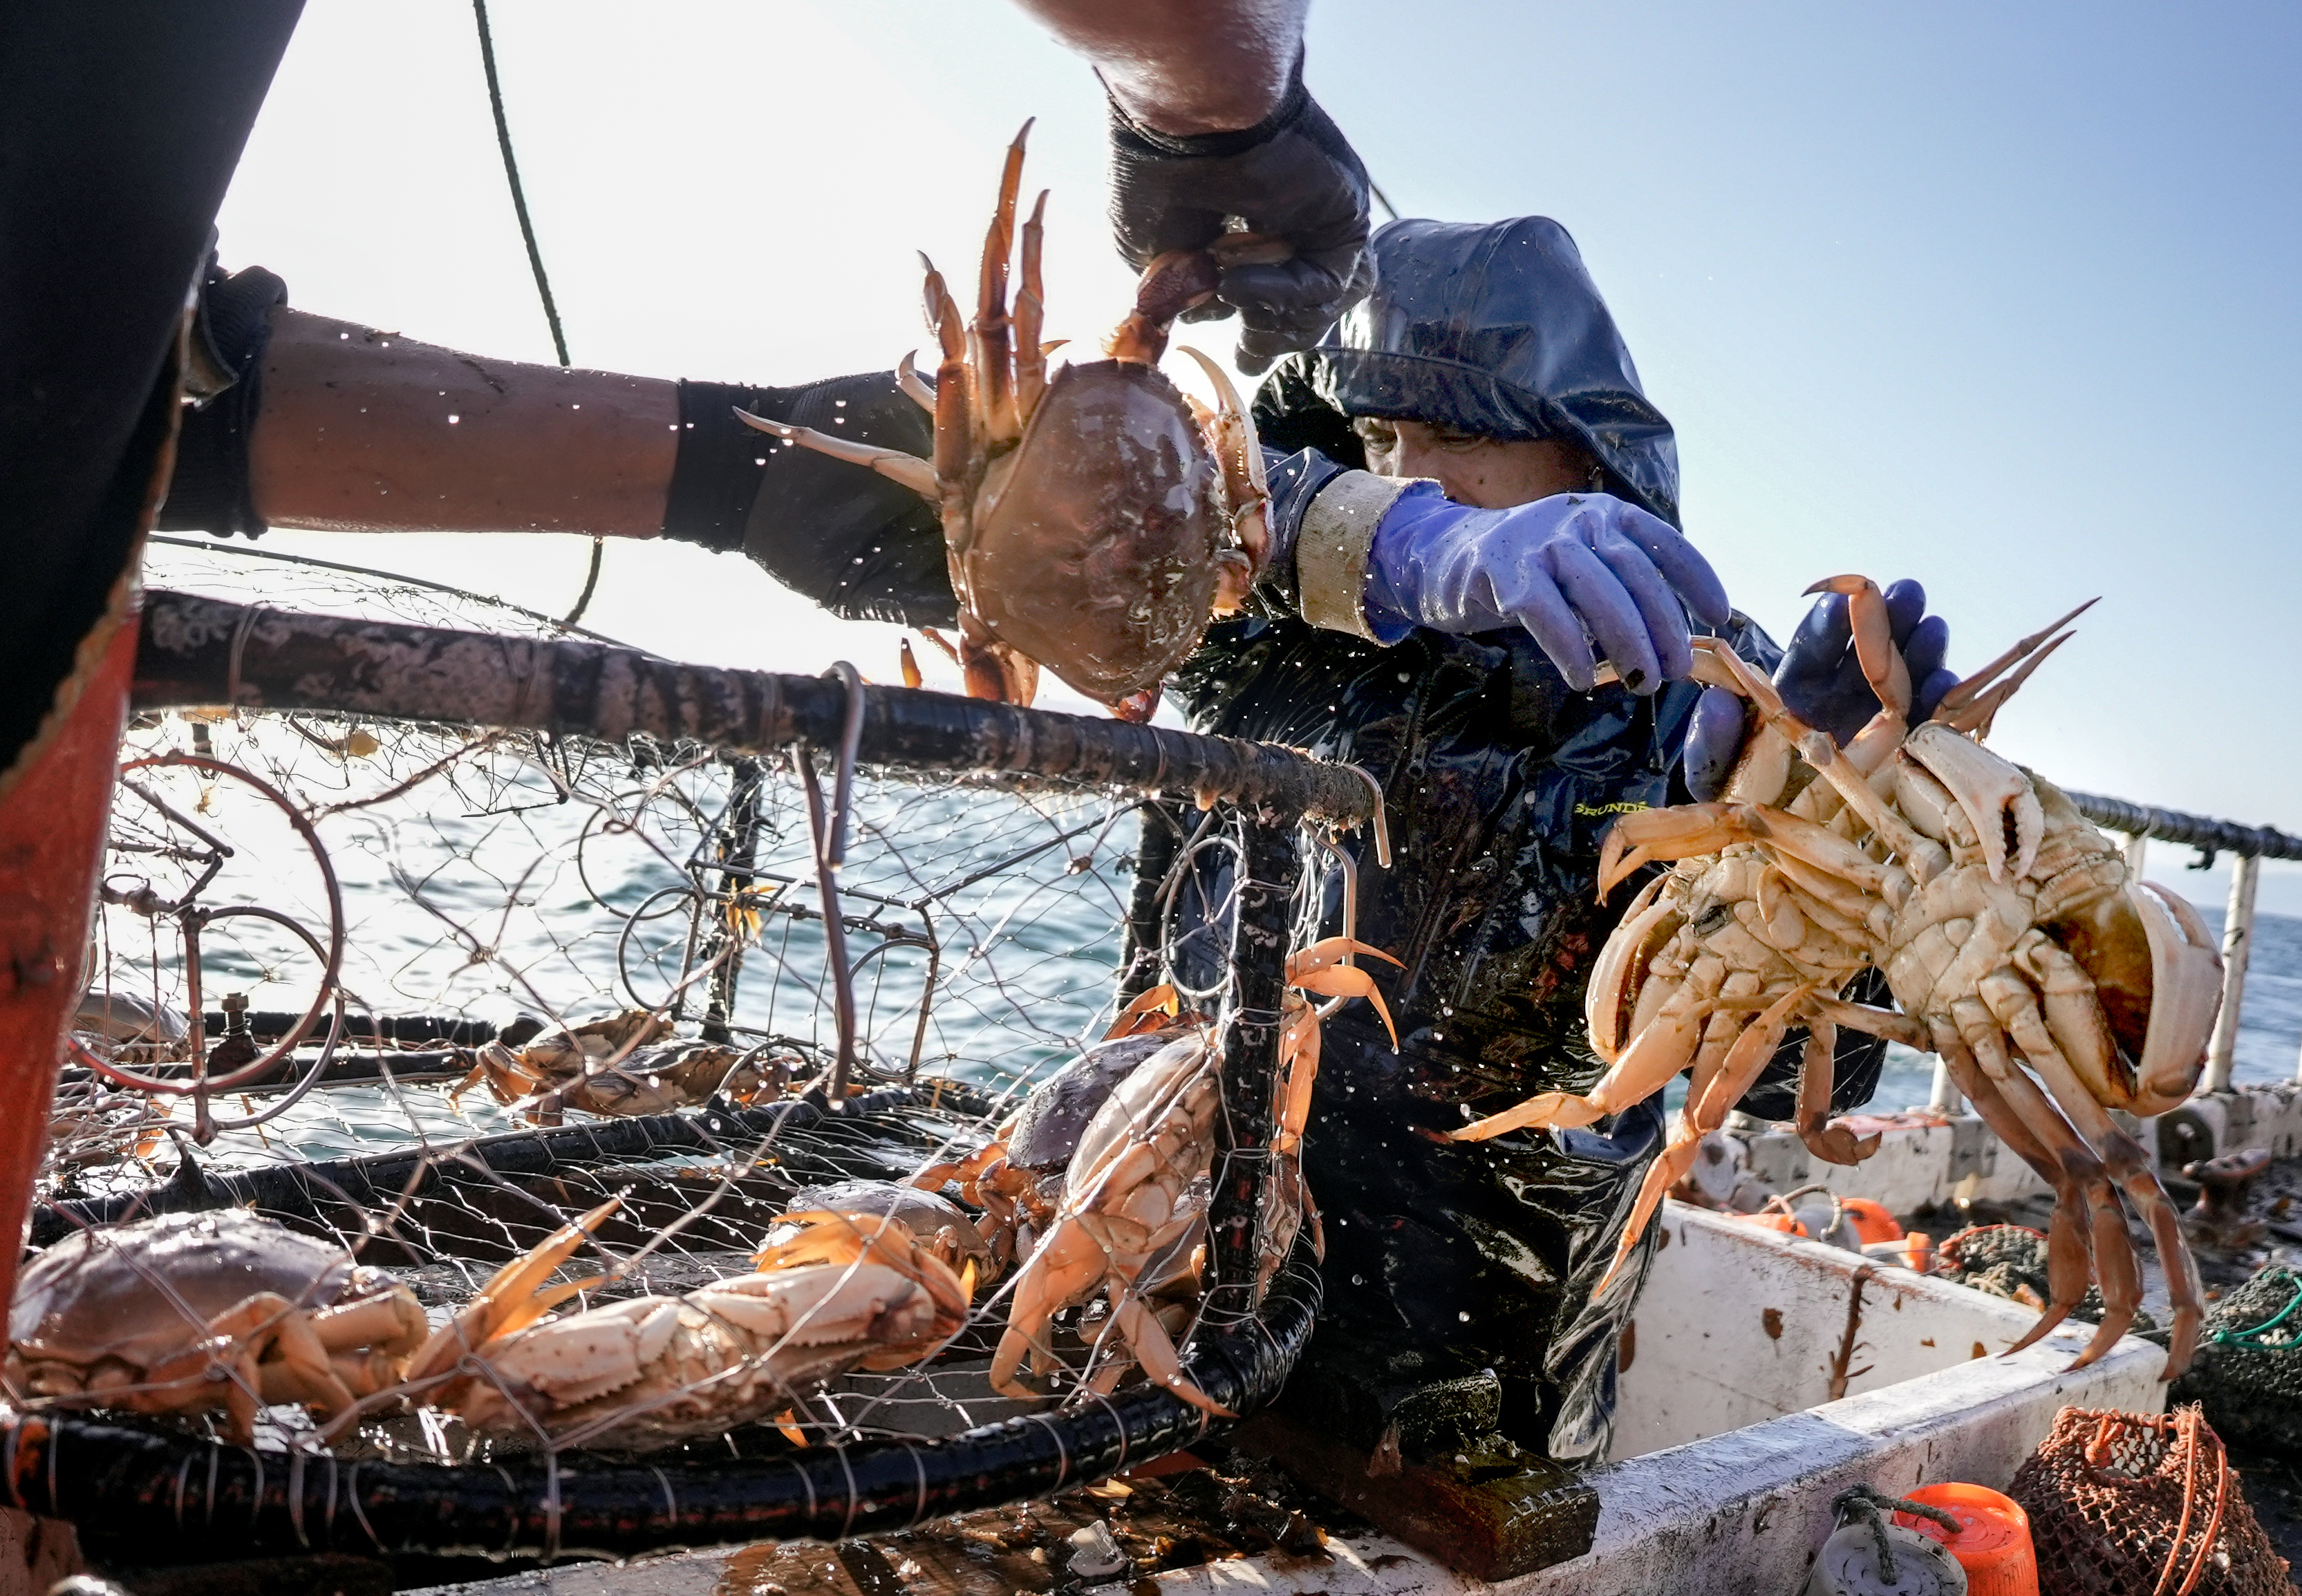 How valuable, and volatile, crabbing can be along the Oregon Coast